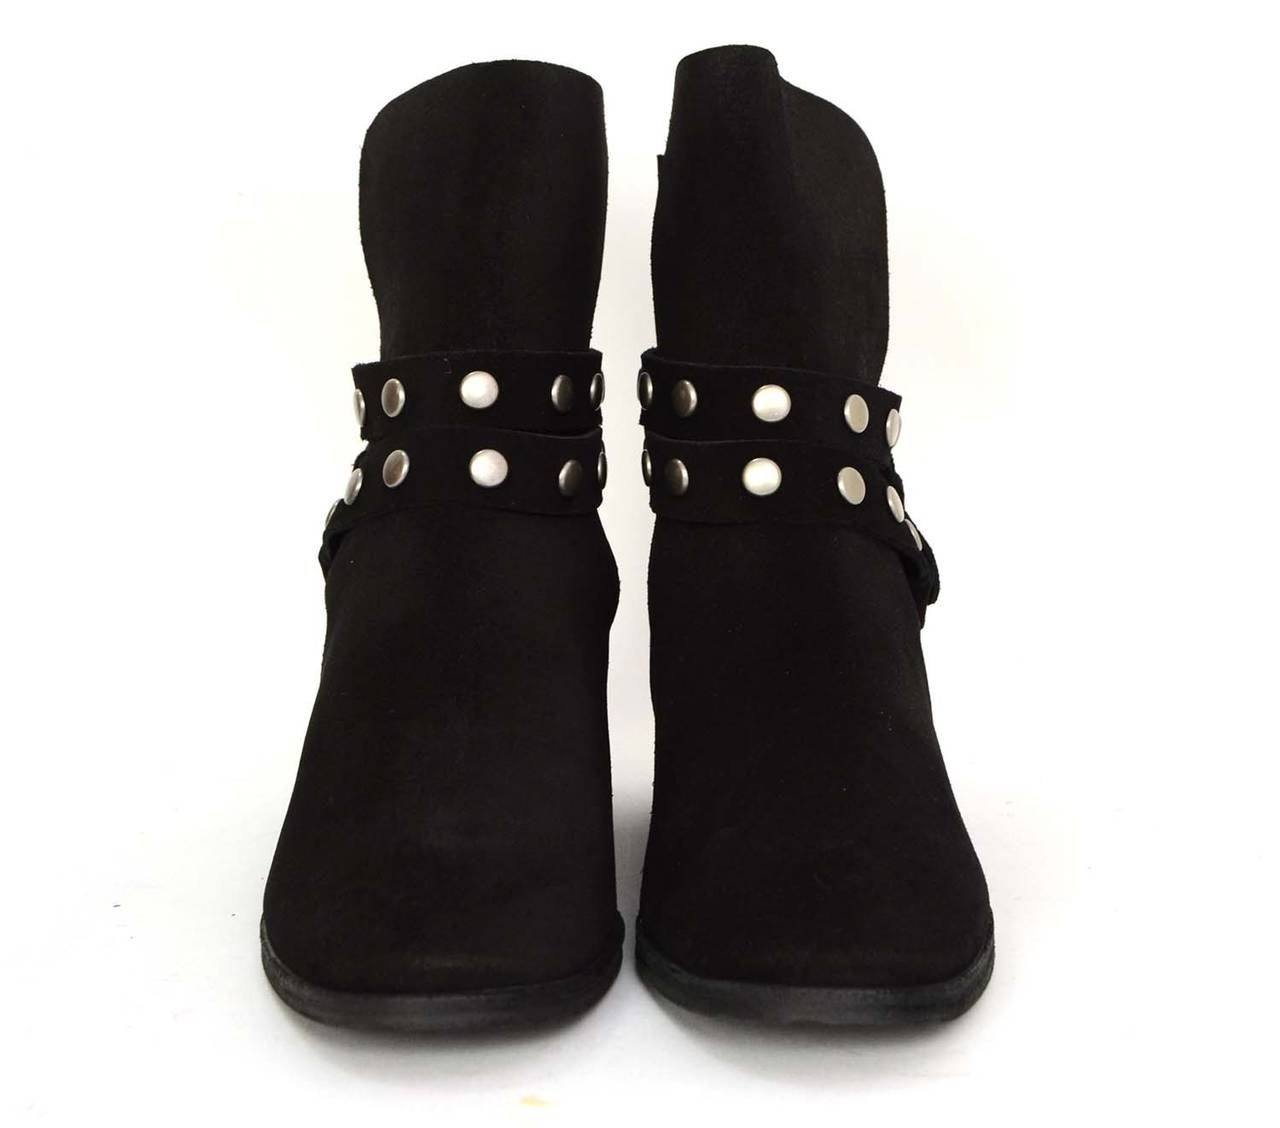 See By Chloe Black Suede Ankle Booties
Features silvertone studs throughout
Made in: Italy
Color: Black and silvertone
Composition: Suede and metal
Sole Stamp: See by Chloe 37 1/2 Vero Cuoio
Closure/opening: Buckle on outside ankles
Overall